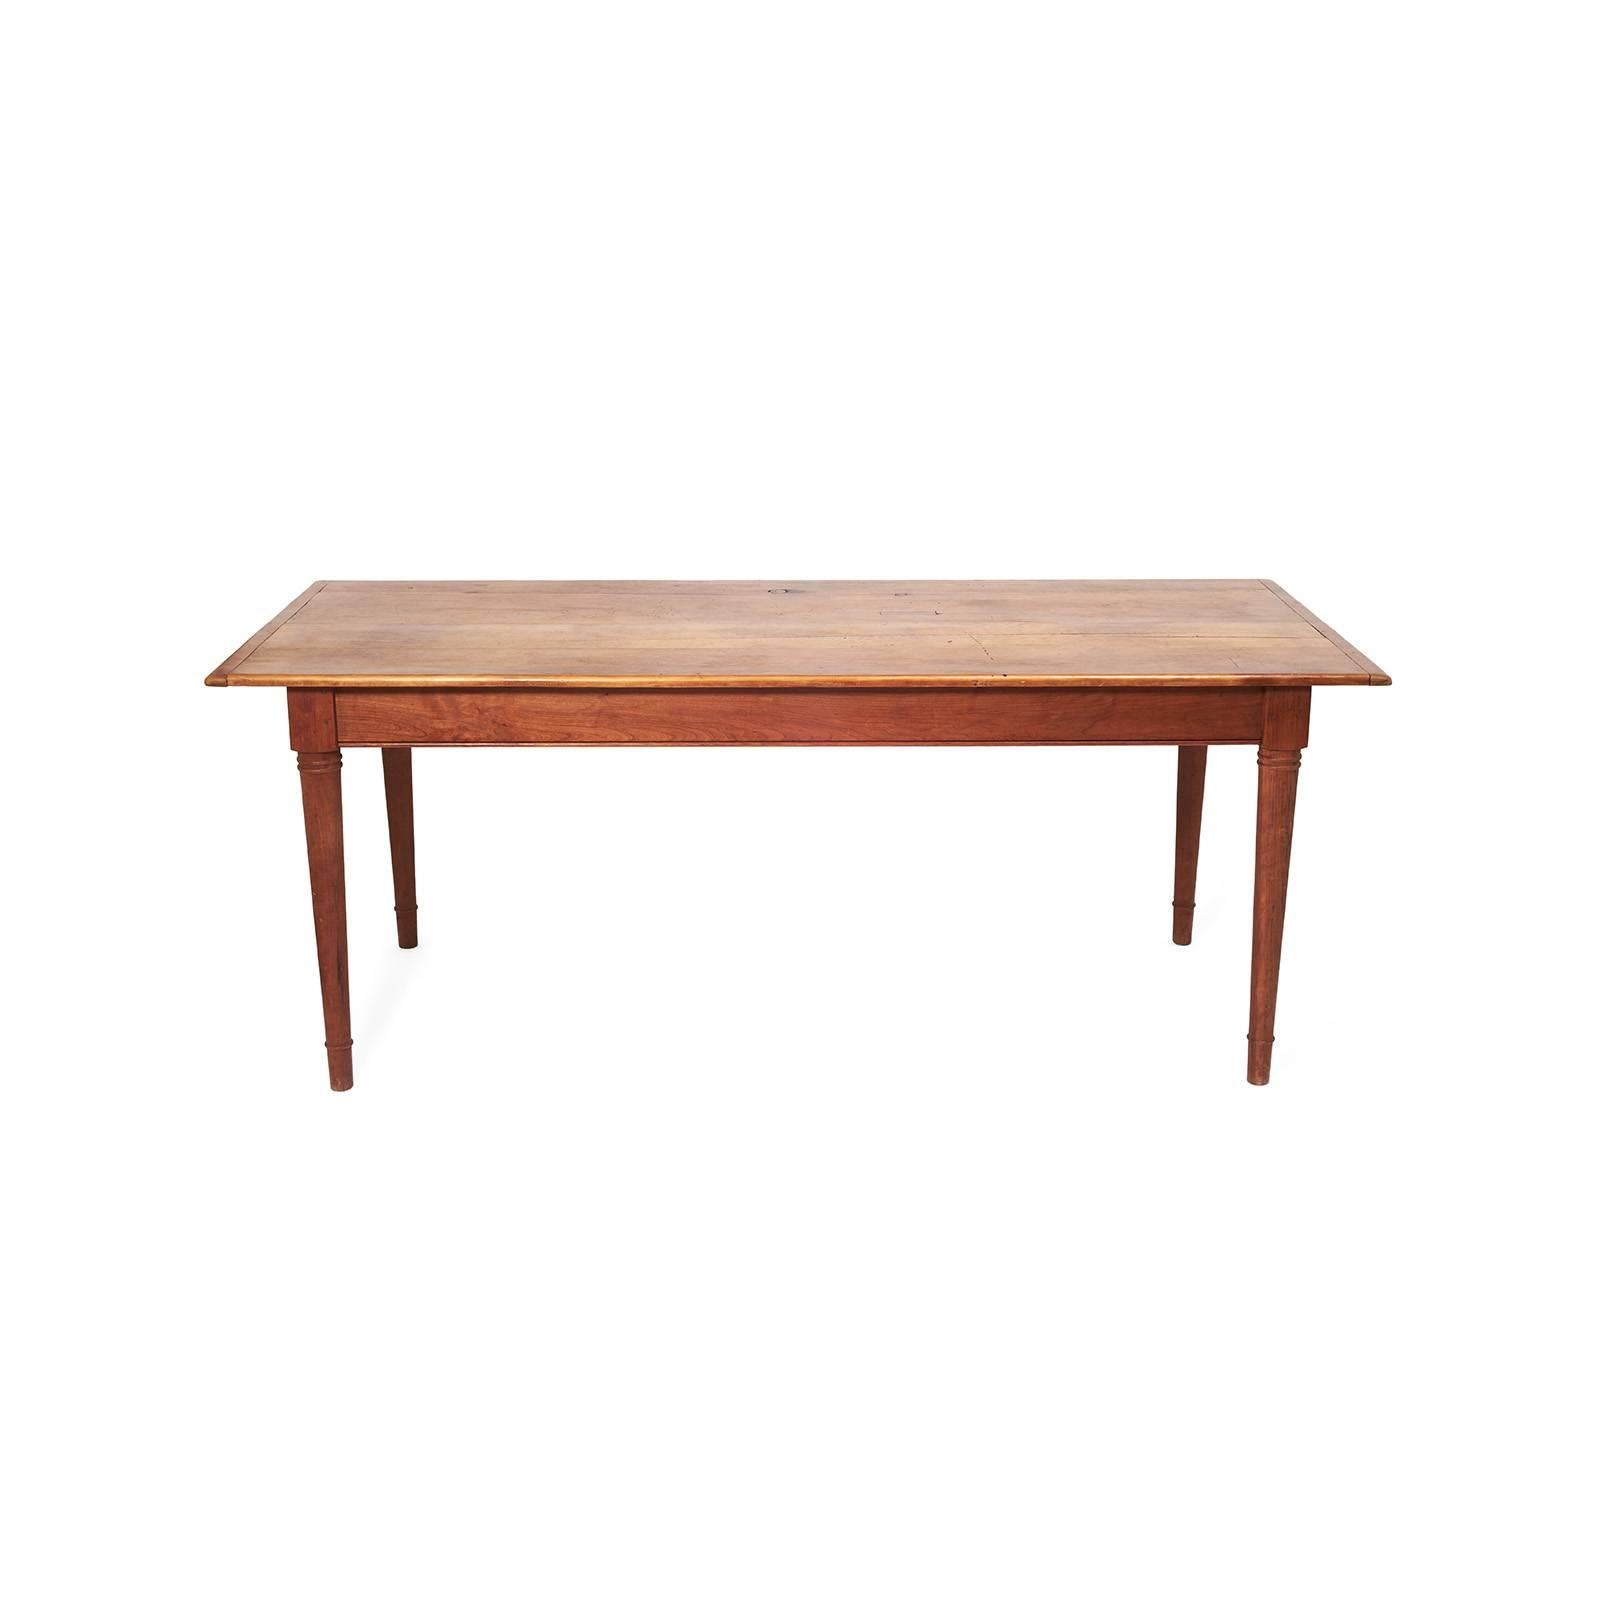 Solid wood 19th century farm table with handsome tapered legs. Great scale for dining, office or entry use. Height from the floor to the bottom of the apron is 24.75